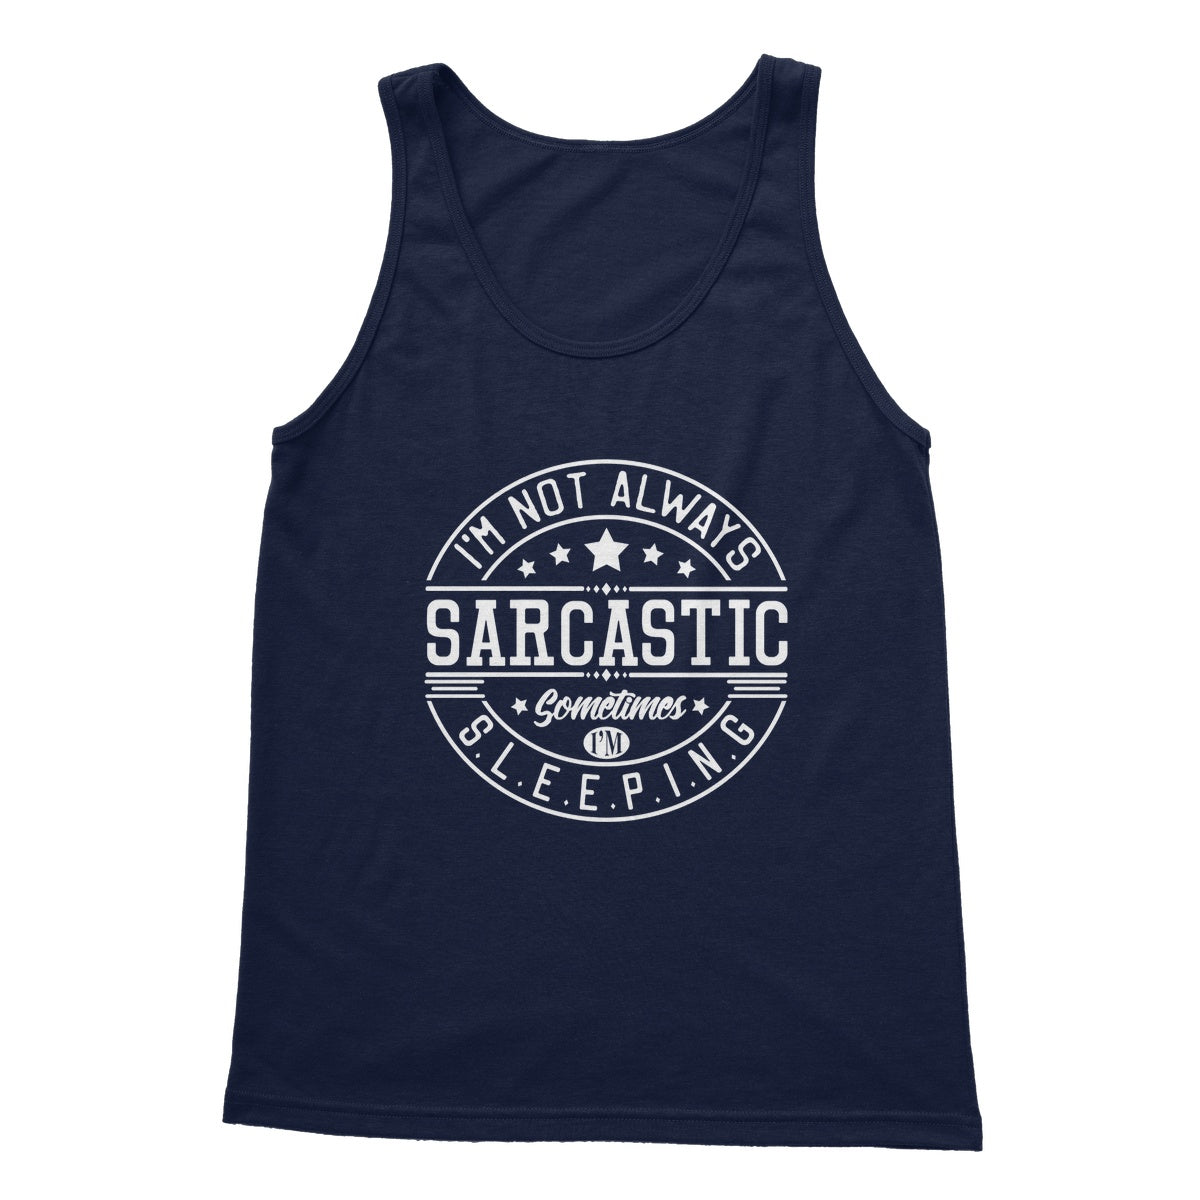 Sarcastic Softstyle Tank Top